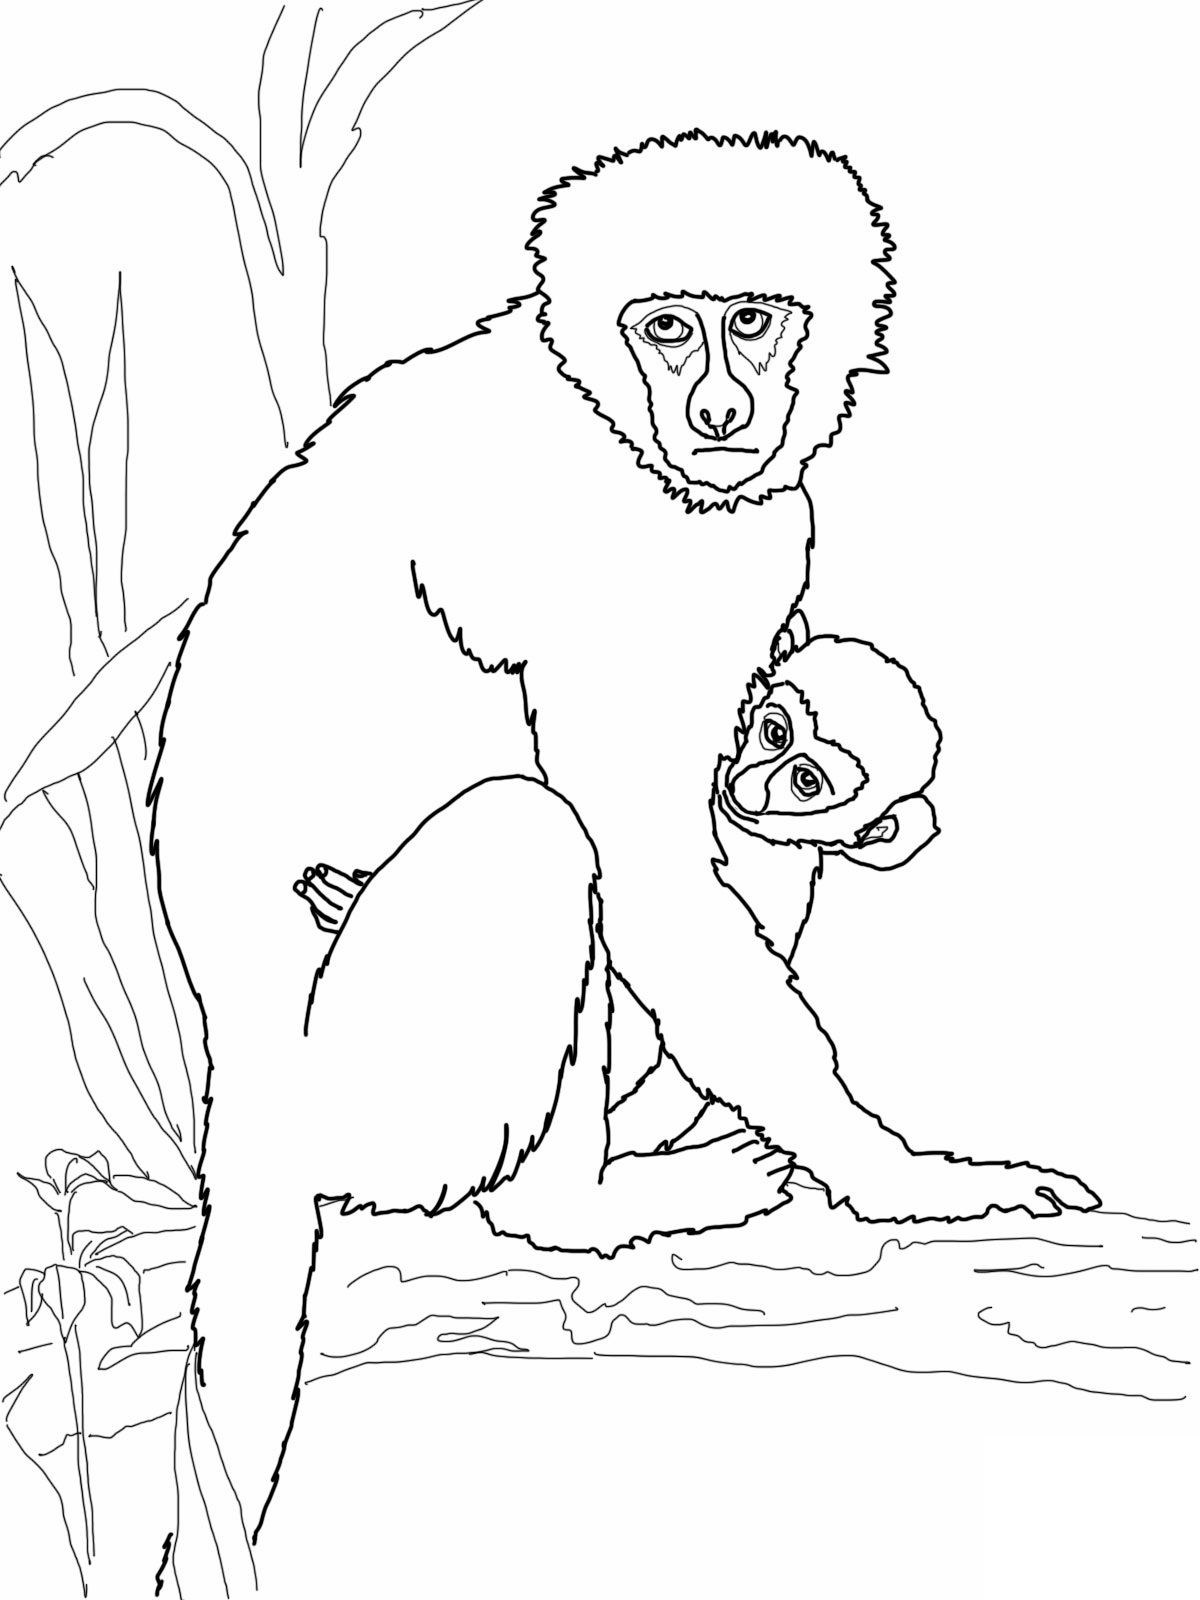  Monkey Coloring Pages | Love coloring pages | #28